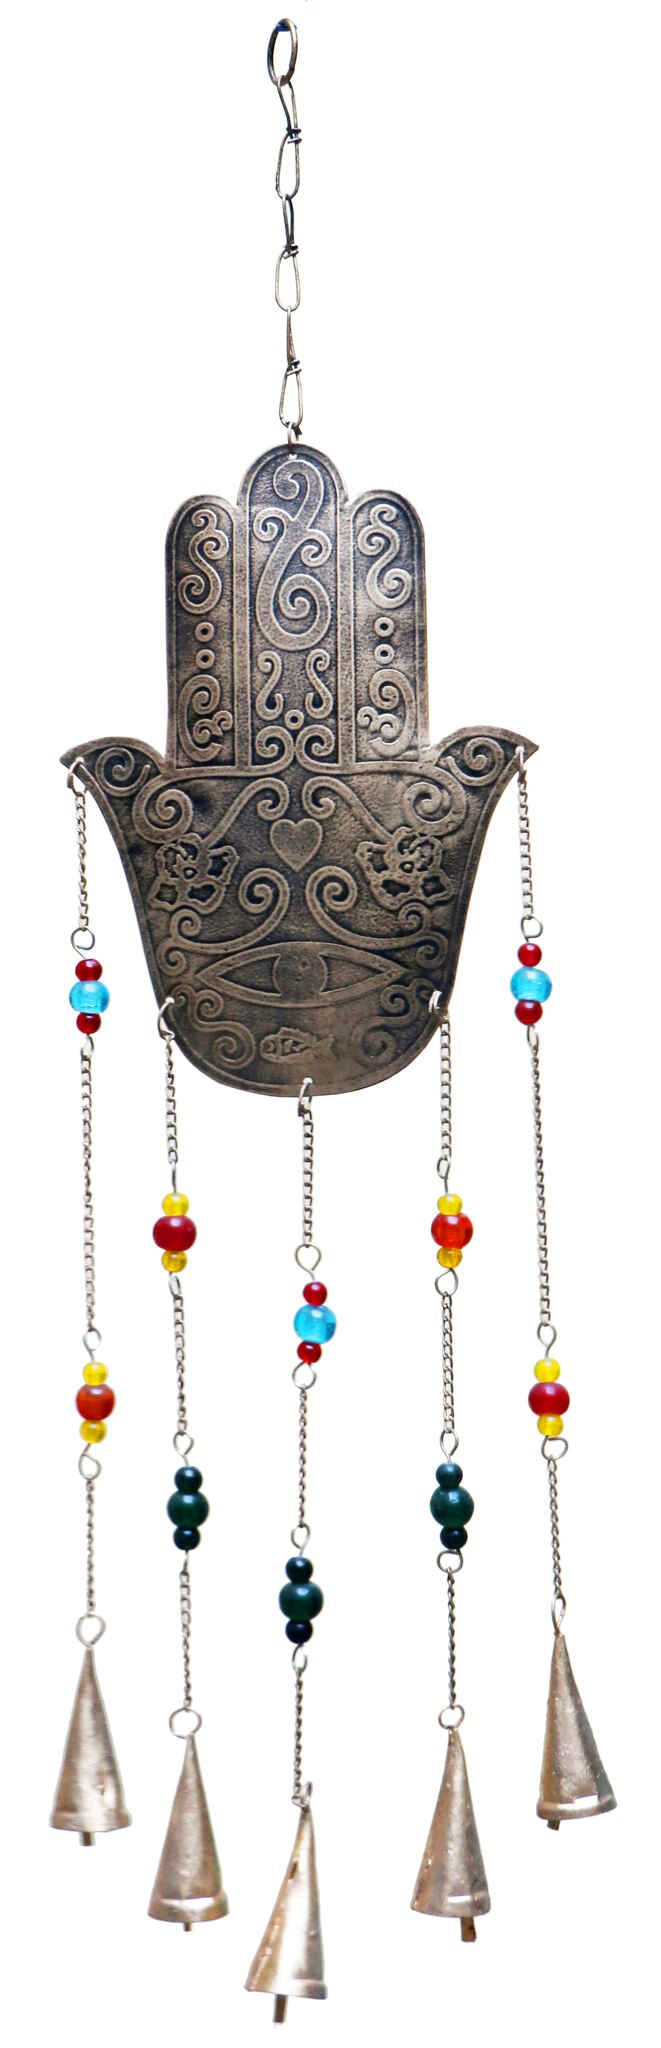 Iron Bell Chimes - Hamsa Etched